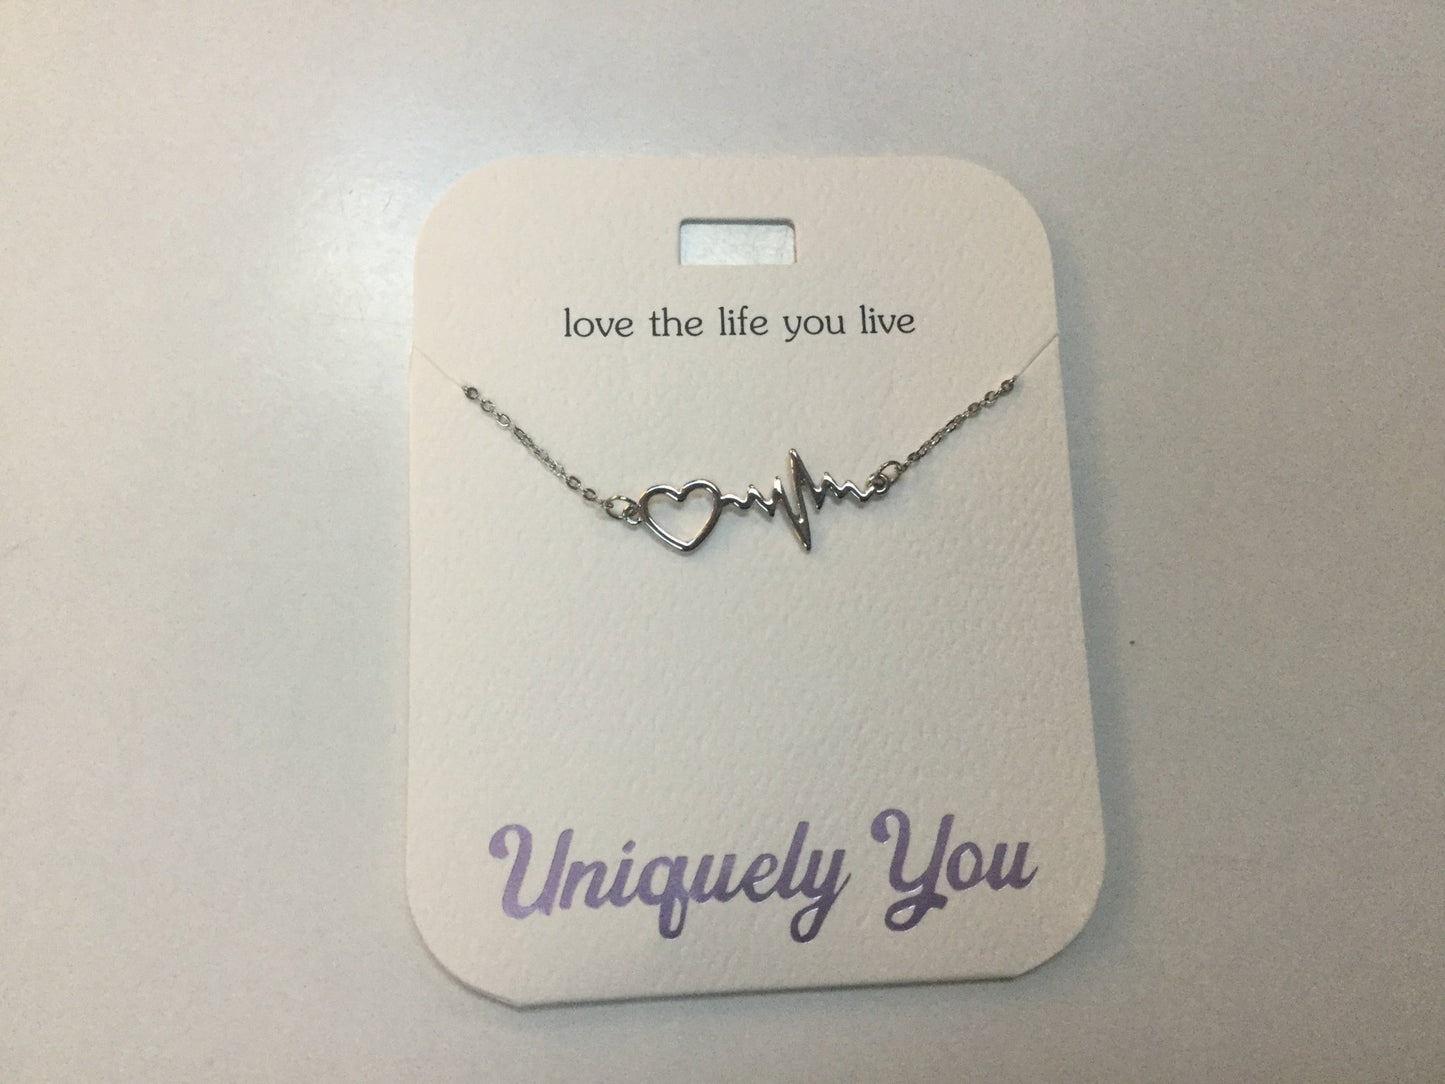 Necklace - YOU 4031 - Love the life you live